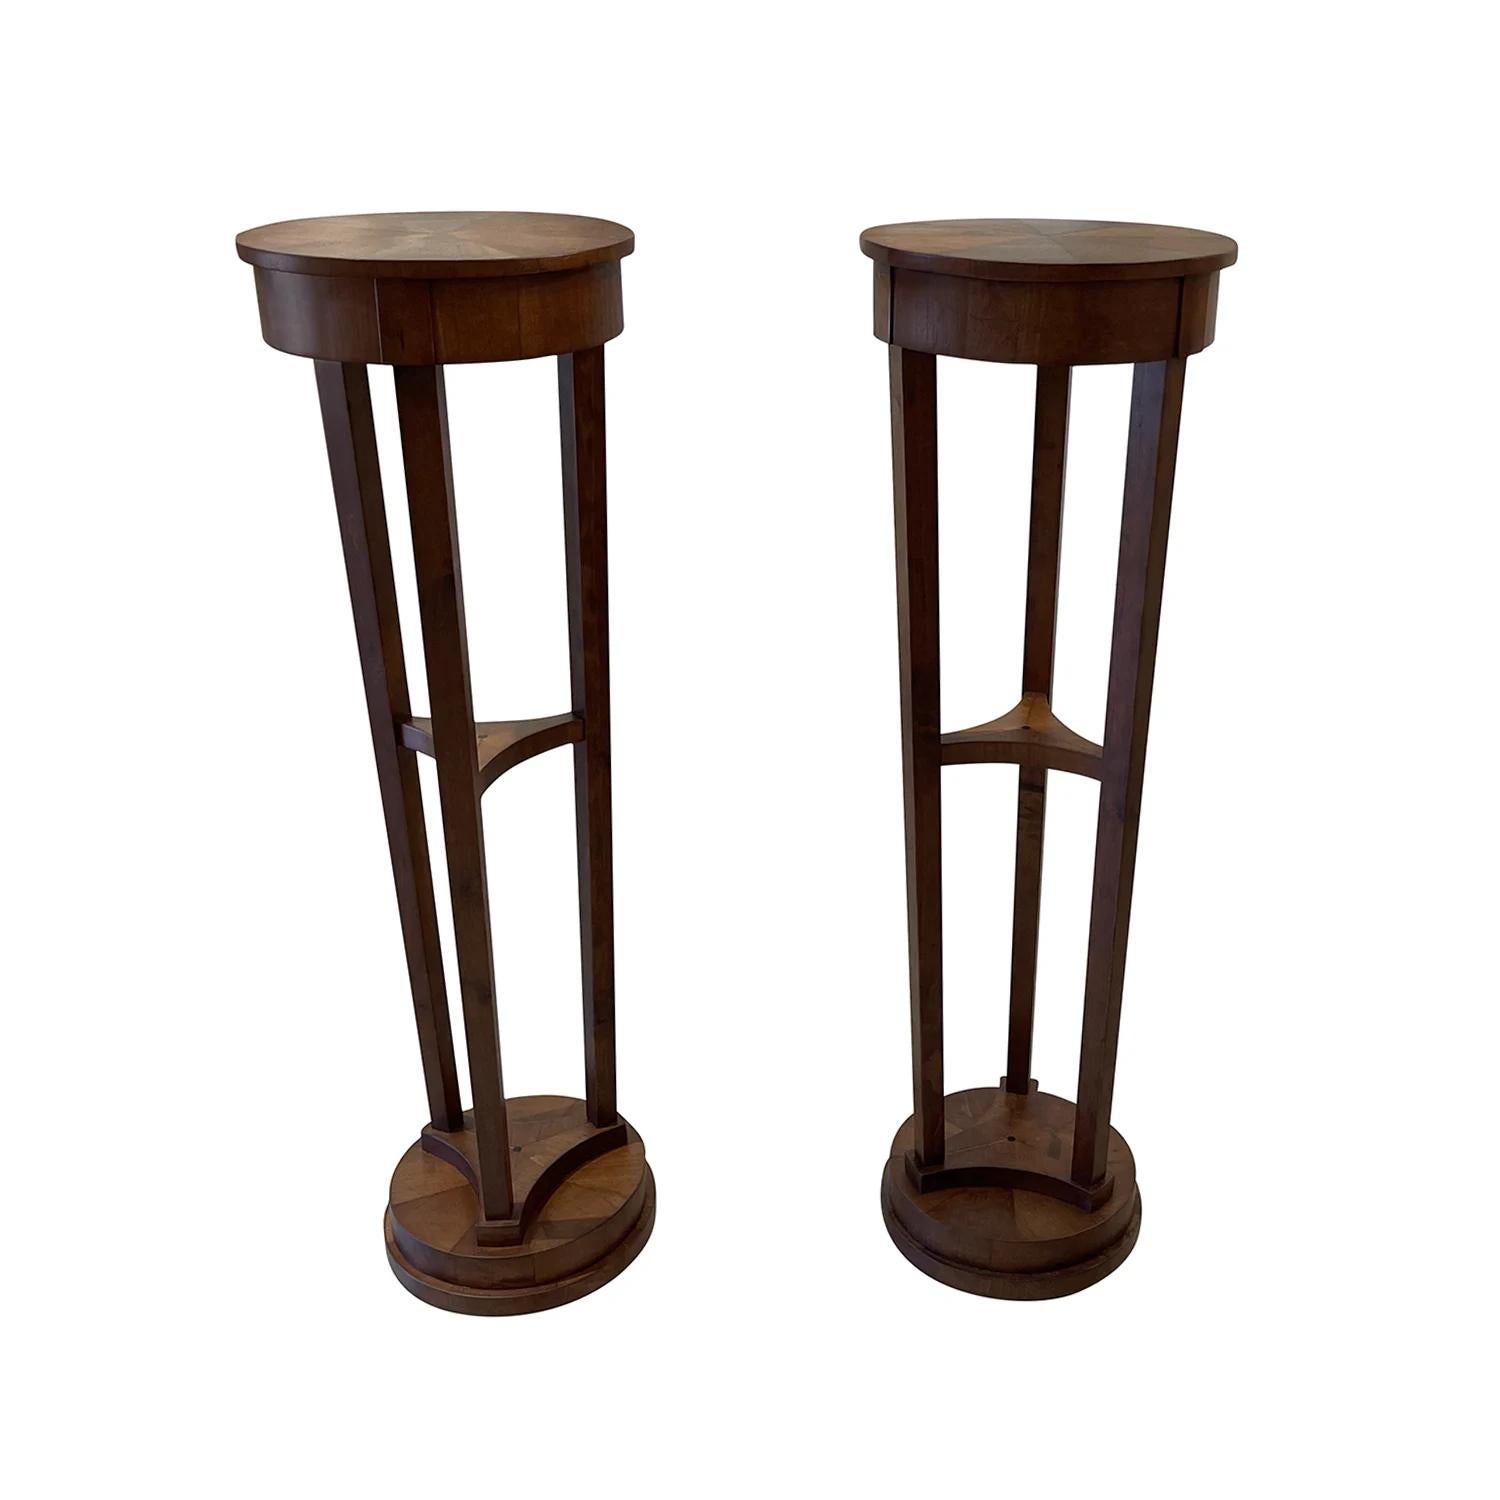 19th Century French Empire Pair of Antique Polished Mahogany Pedestals In Good Condition For Sale In West Palm Beach, FL